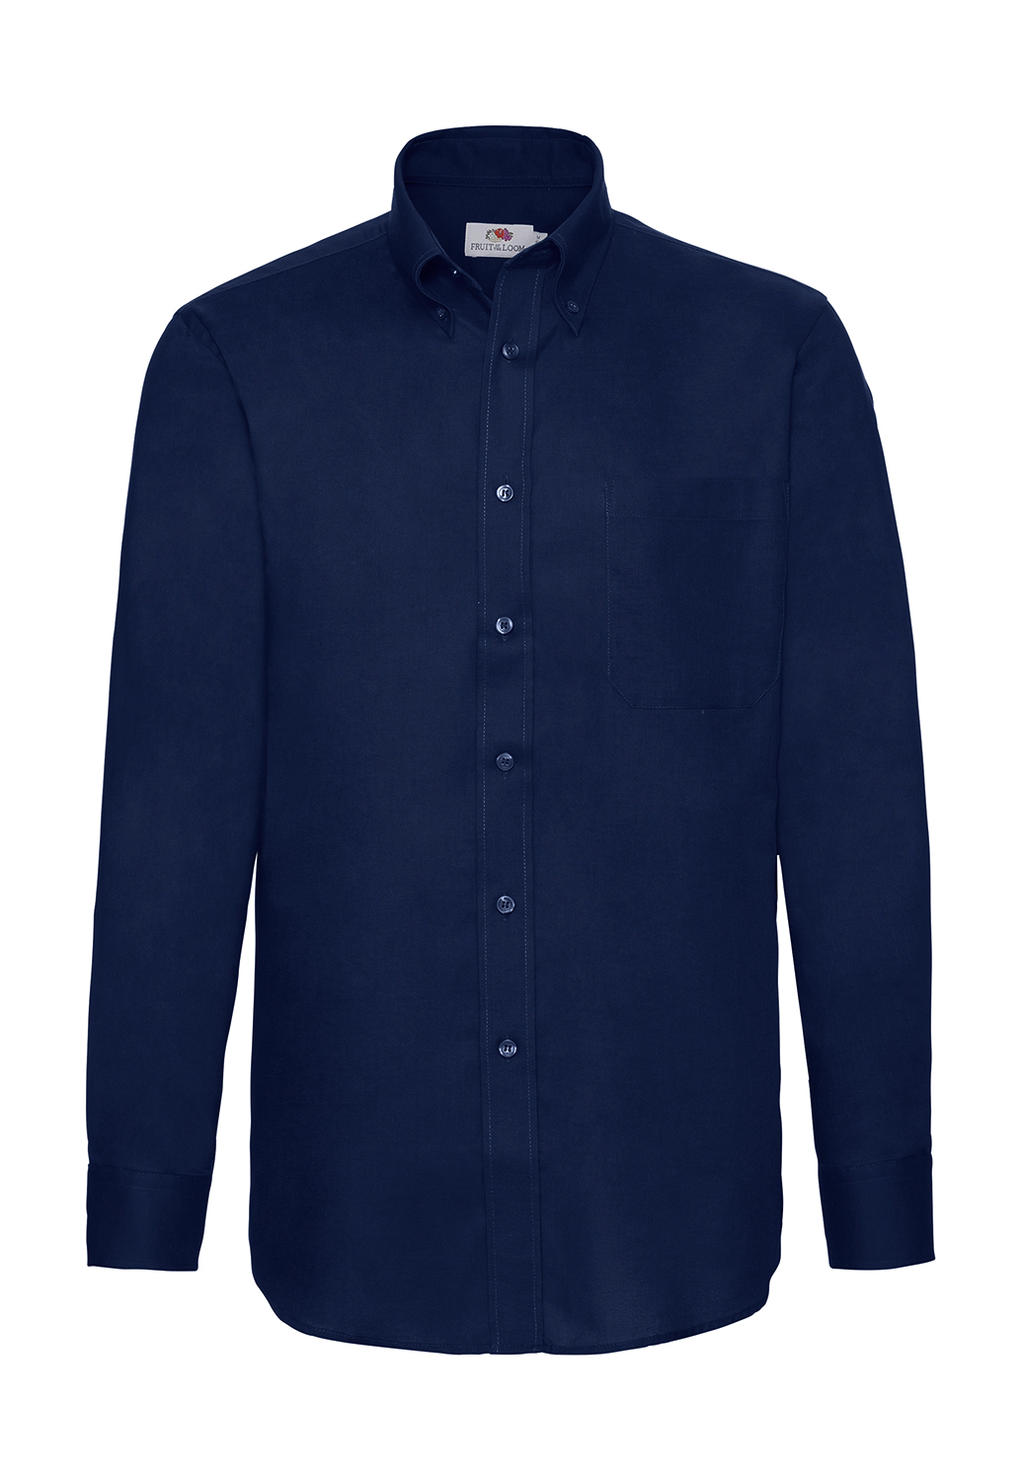  Oxford Shirt LS in Farbe Navy